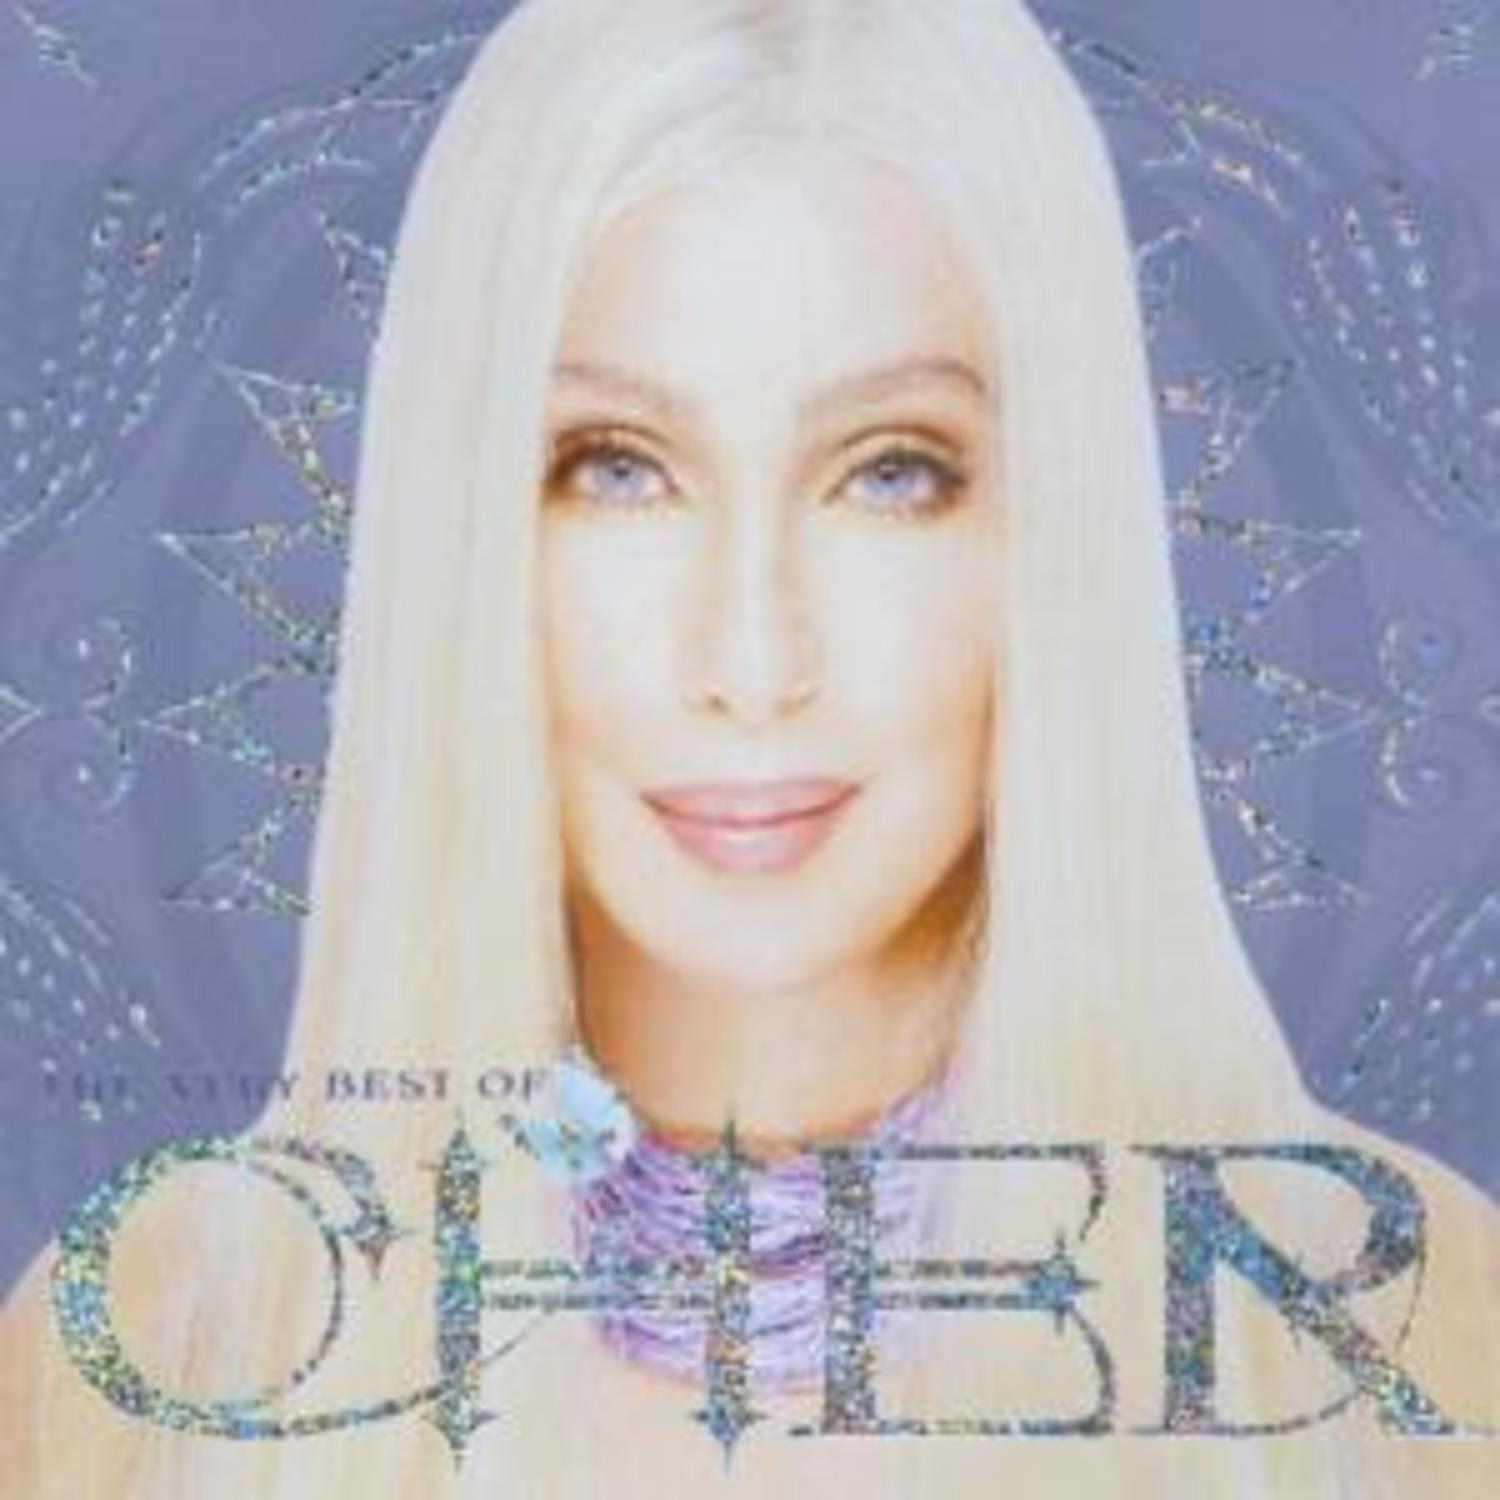 Cher - THE VERY BEST OF 